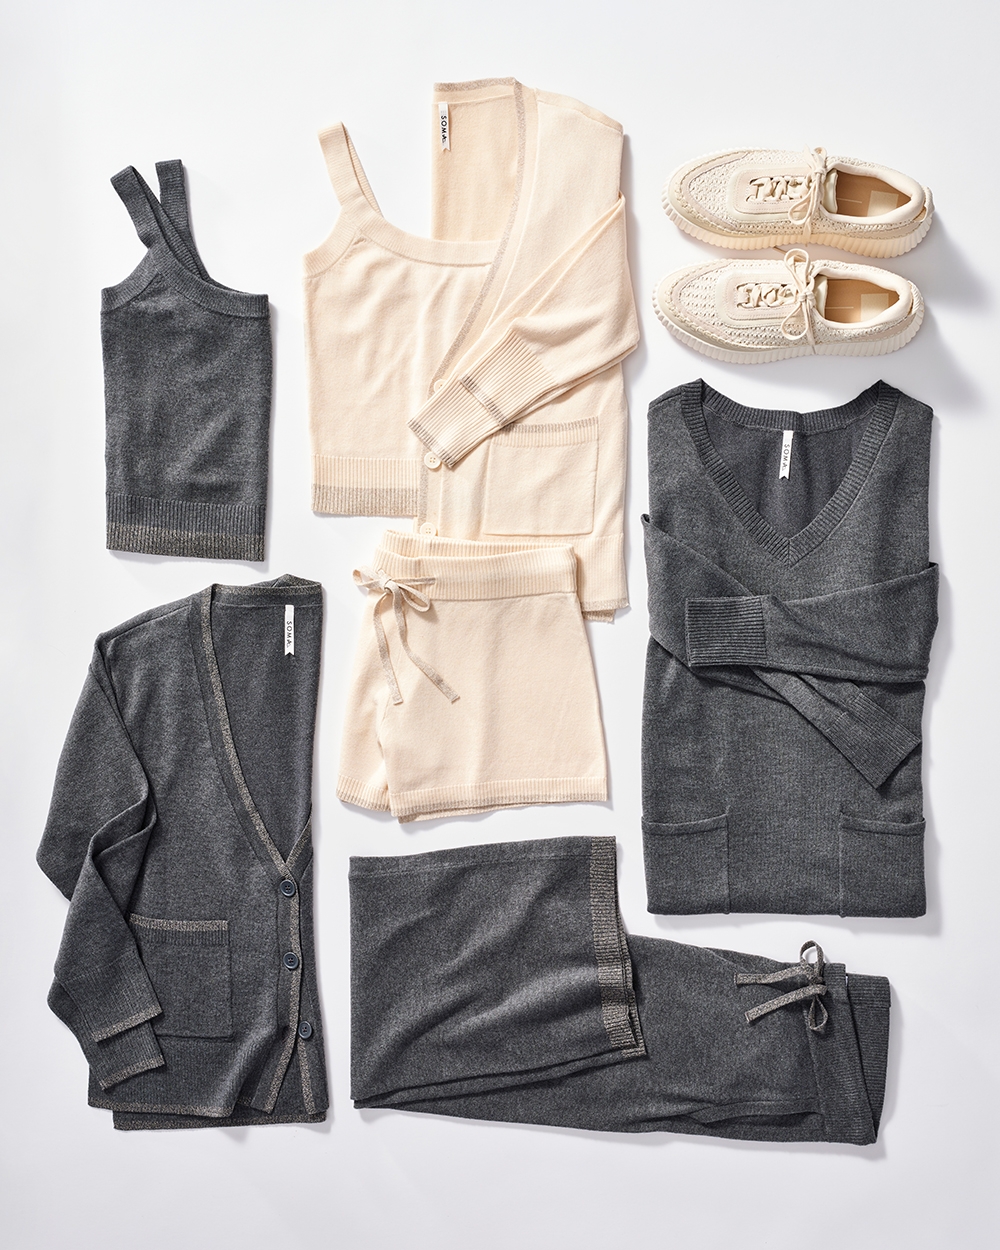 Soma<sup class=st-superscript>®</sup> laydown of soft loungewear styles in dark grey and off-white colors.